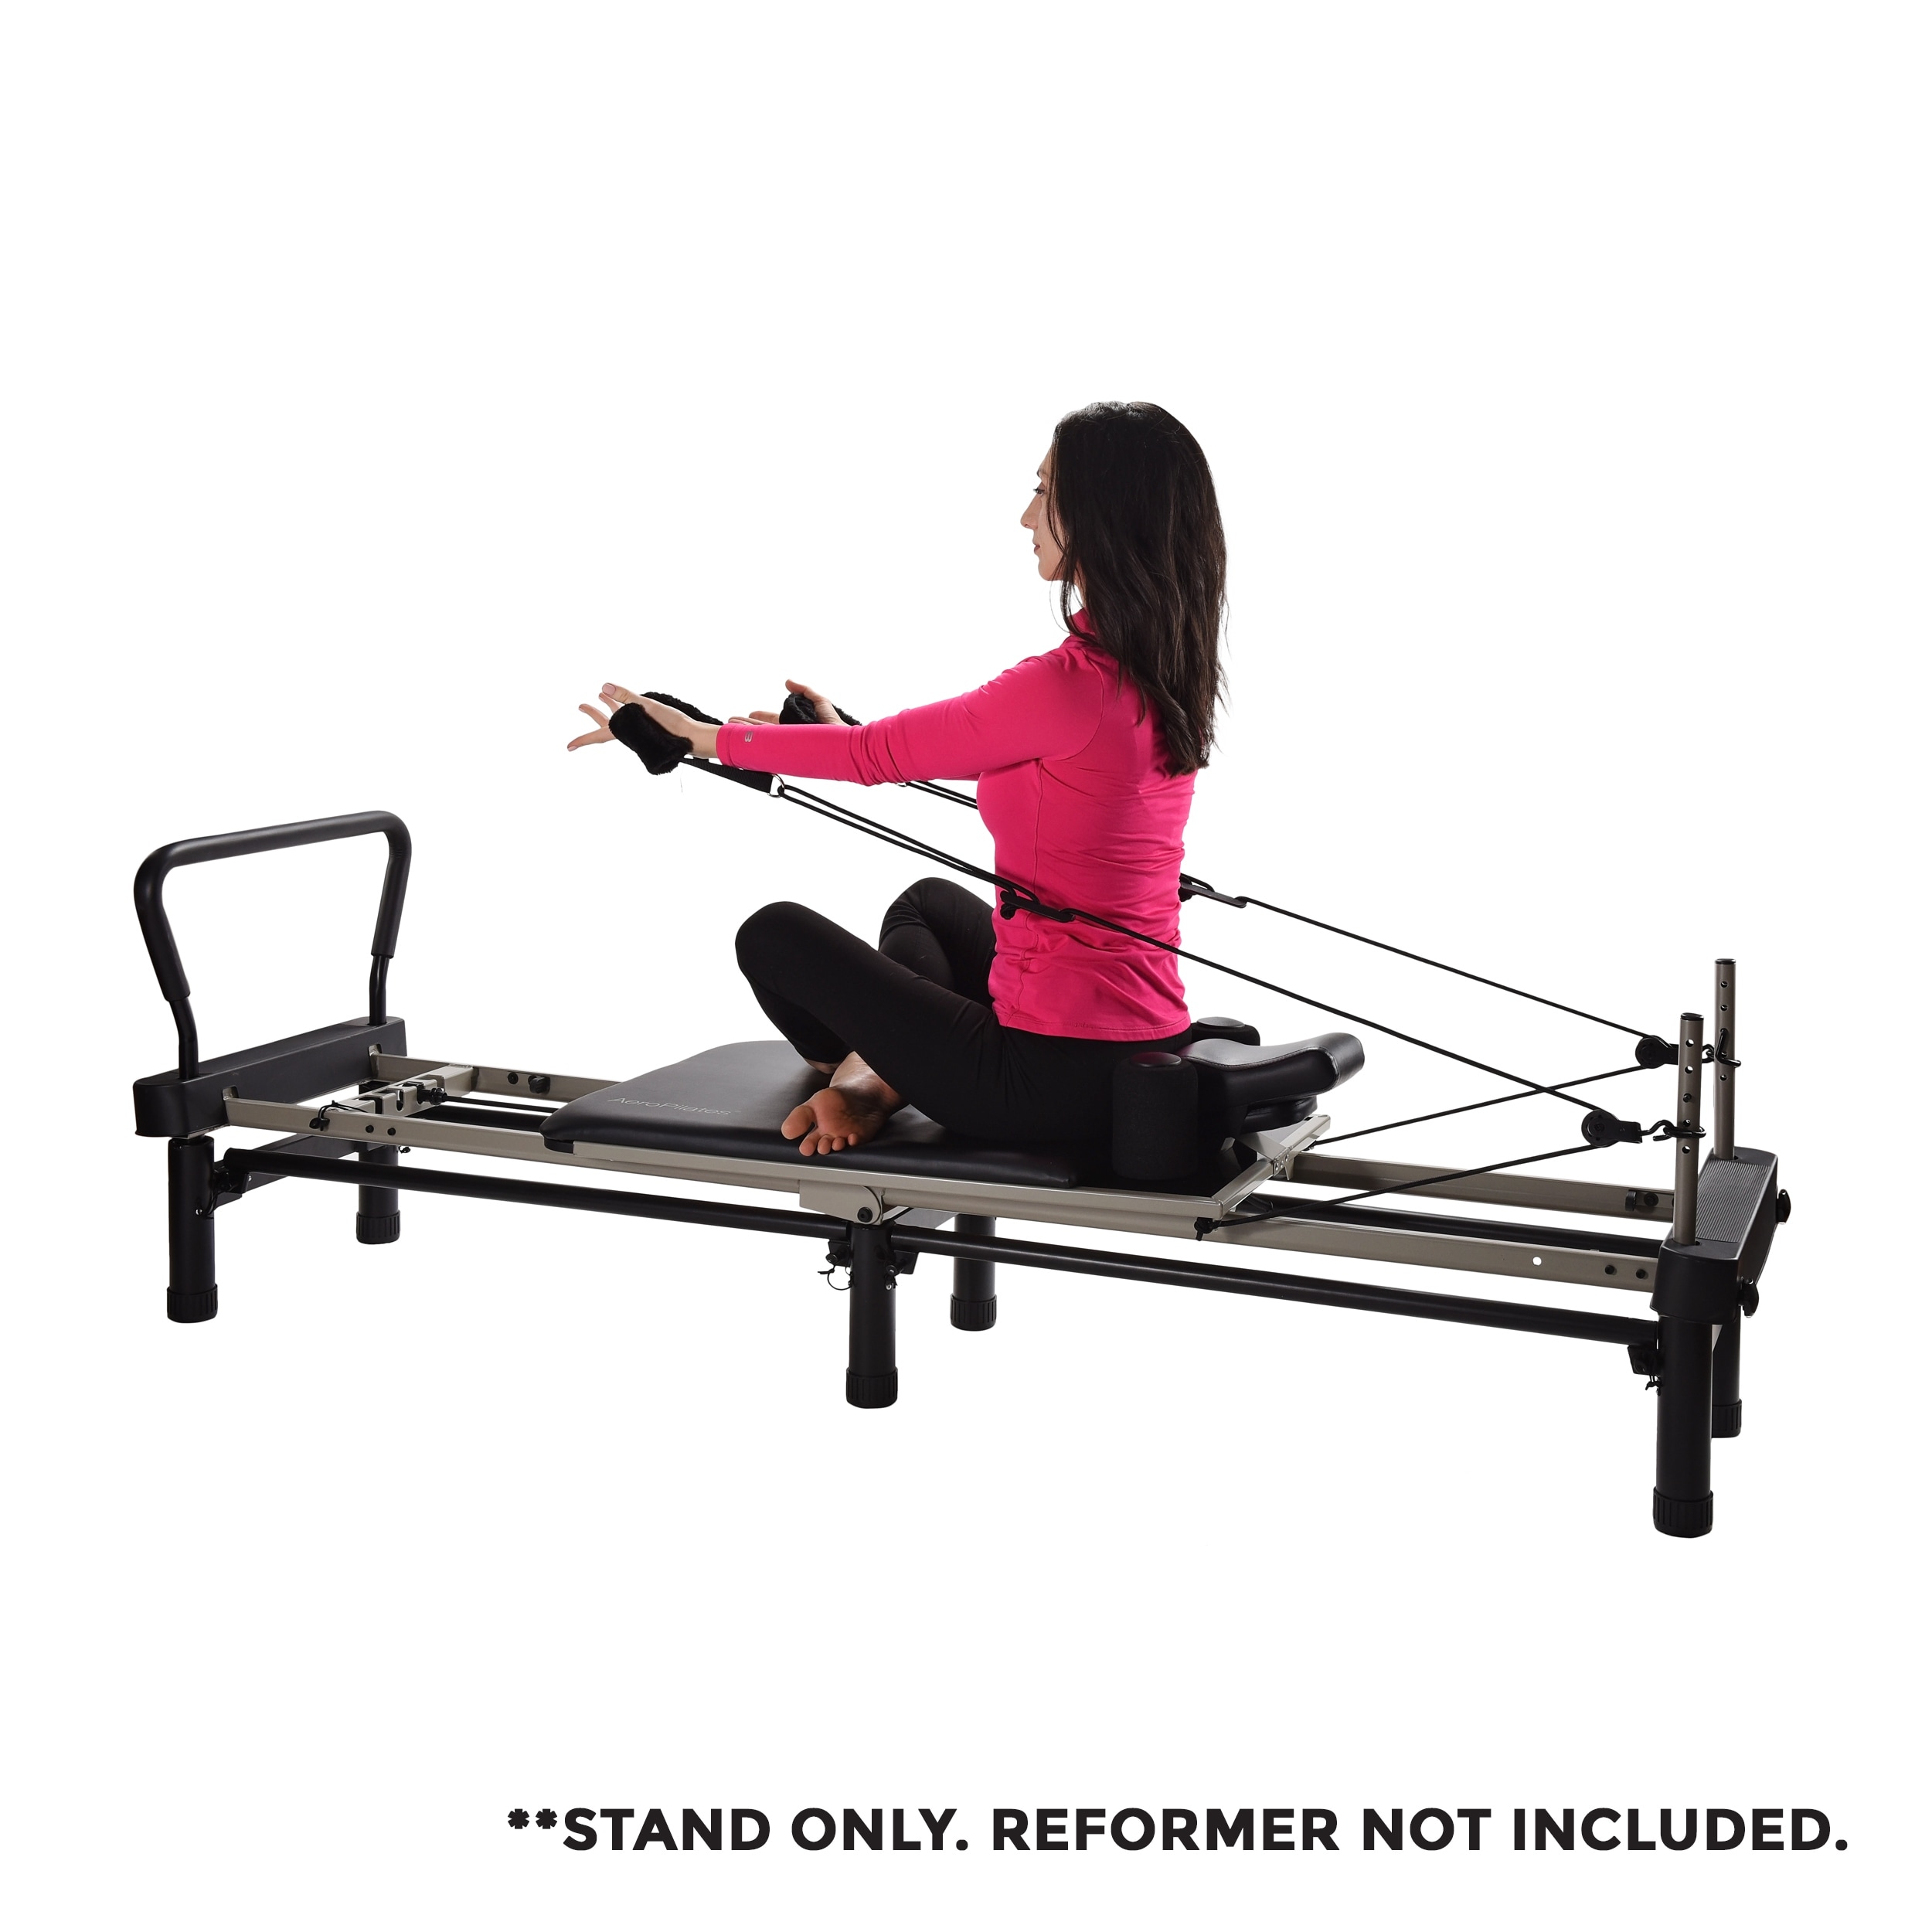 https://ak1.ostkcdn.com/images/products/is/images/direct/f32a2fb6d09bad1f46513c0d61db6782efefd37a/Stamina-AeroPilates-4-cord-Reformer-Stand.jpg